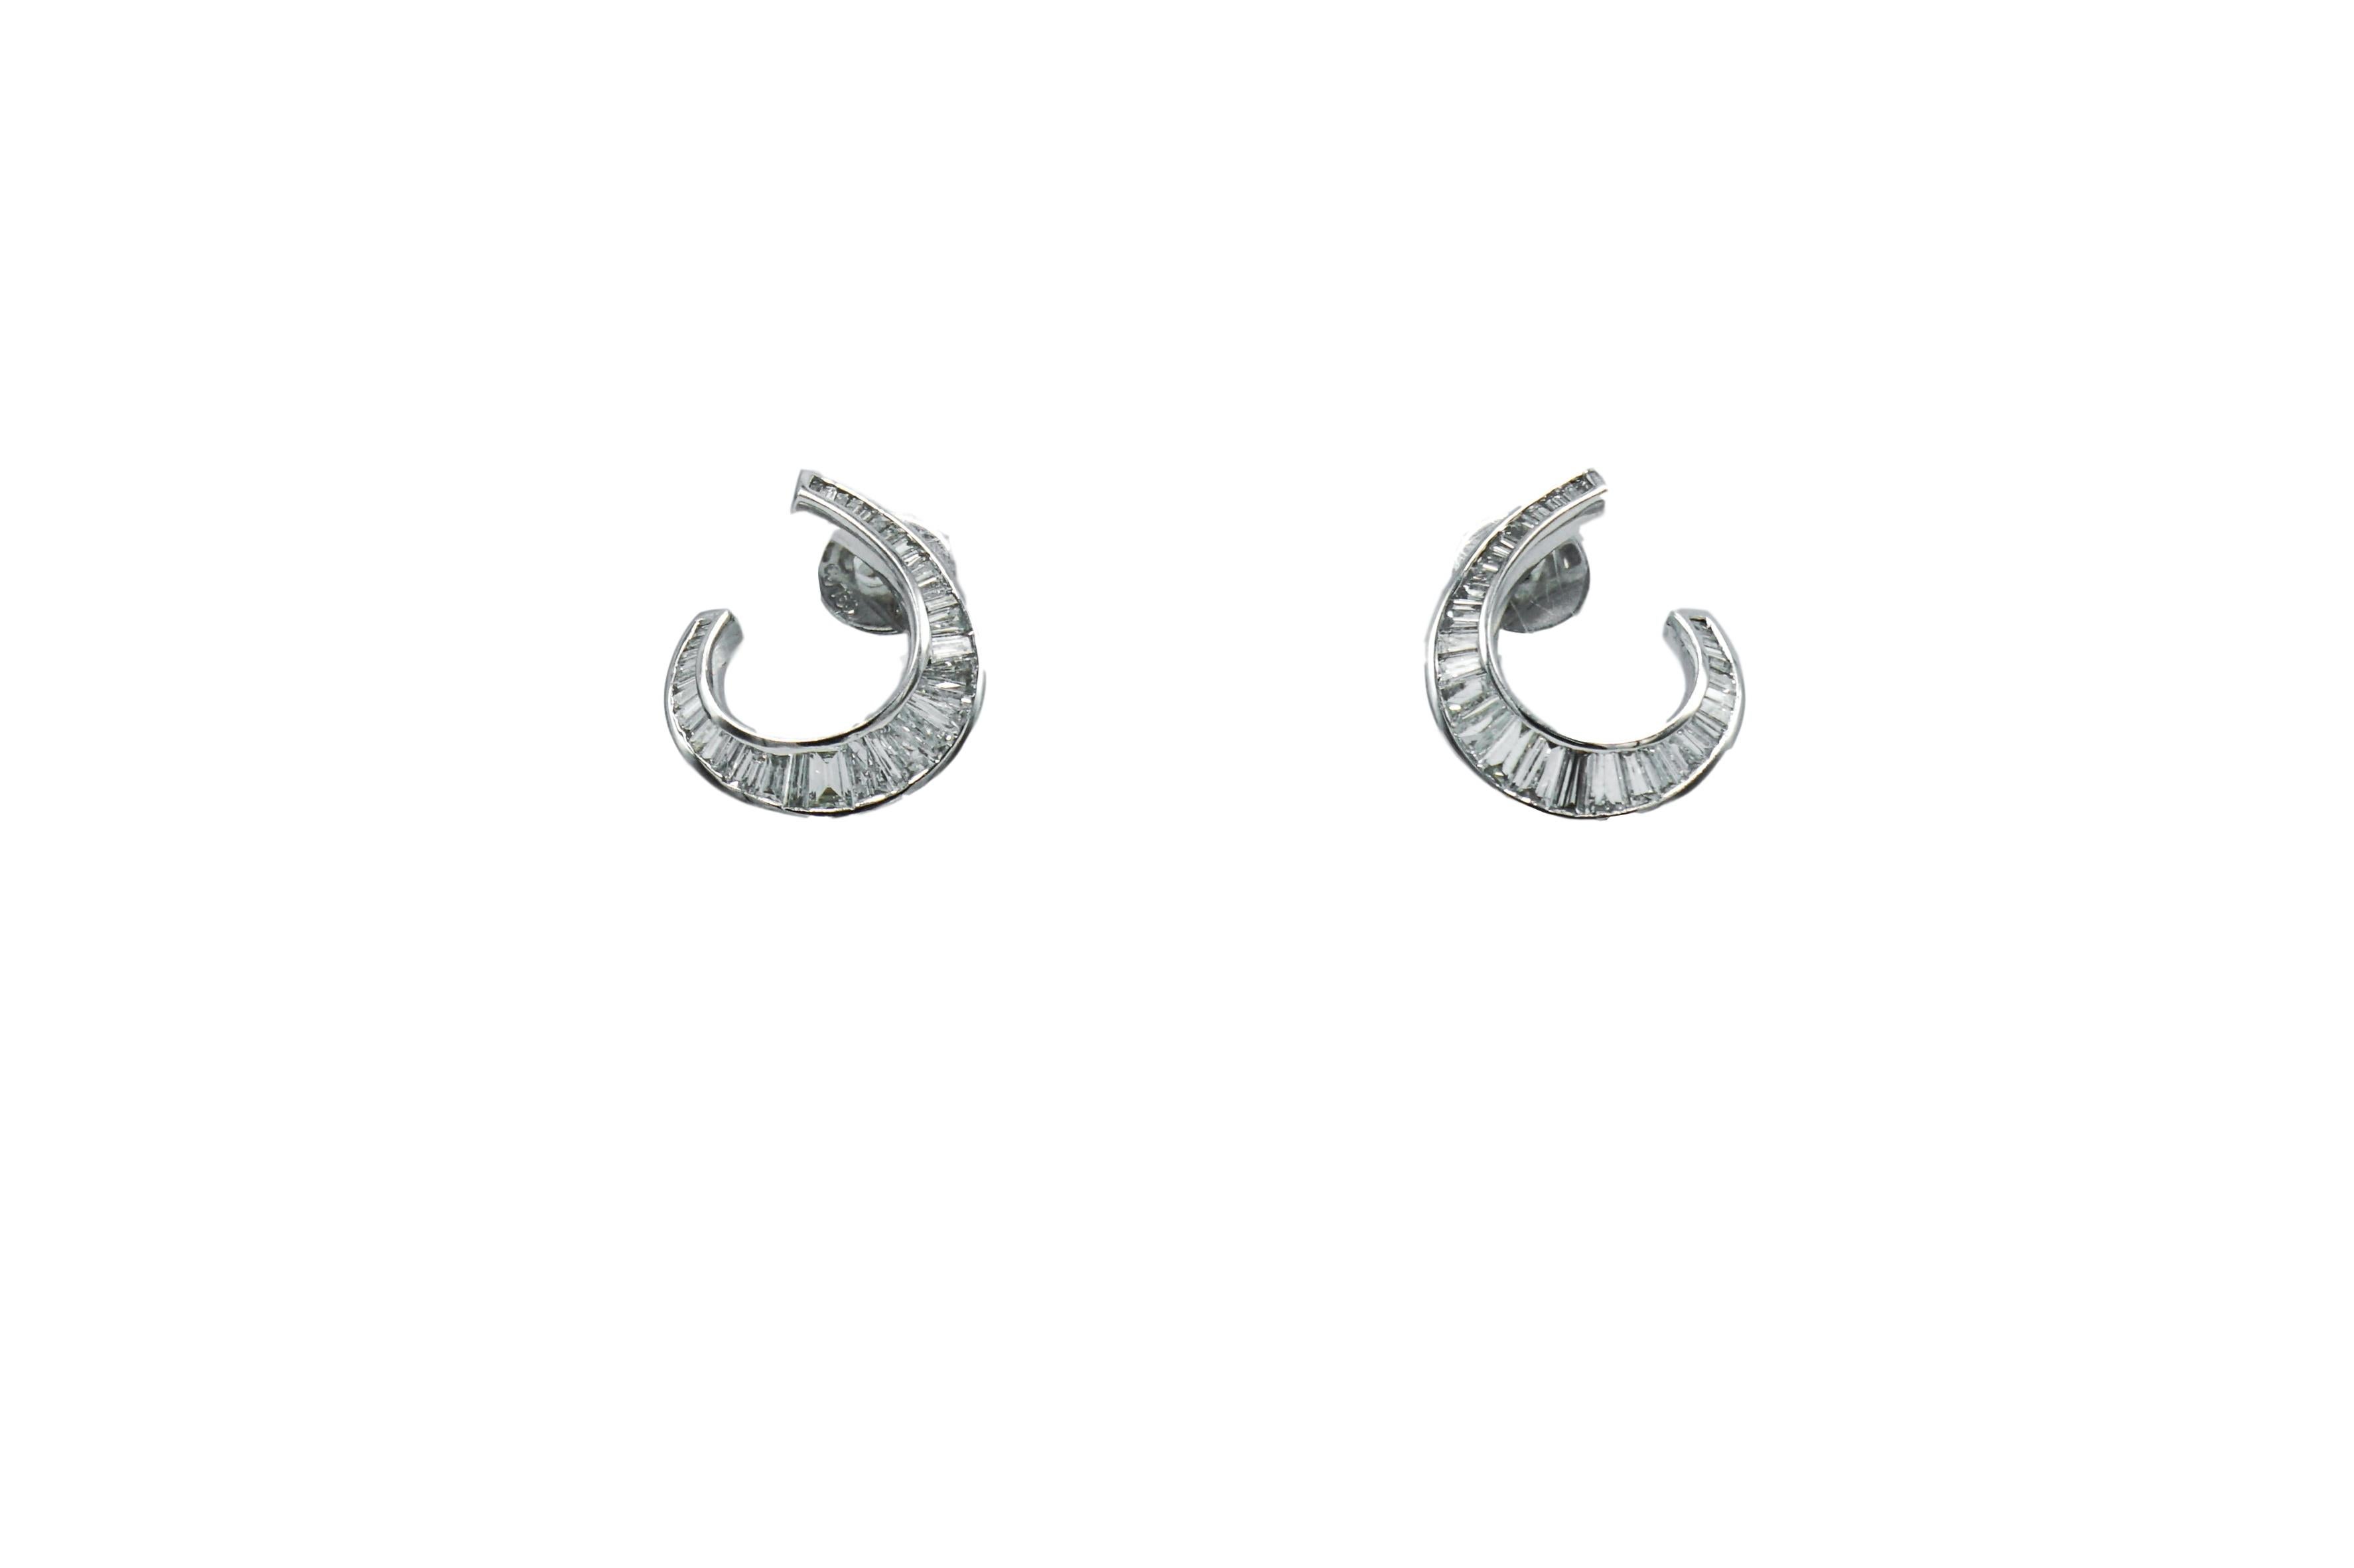 Pair of White Gold and Diamond Earrings
18 kt., 66 baguette diamonds ap. 2.25 cts., ap. 5.5 dwts.   

Diamonds: H-I-VS, several SI. 

Posts. 7/8 x 11/16 inch. 

SKU#E-01174